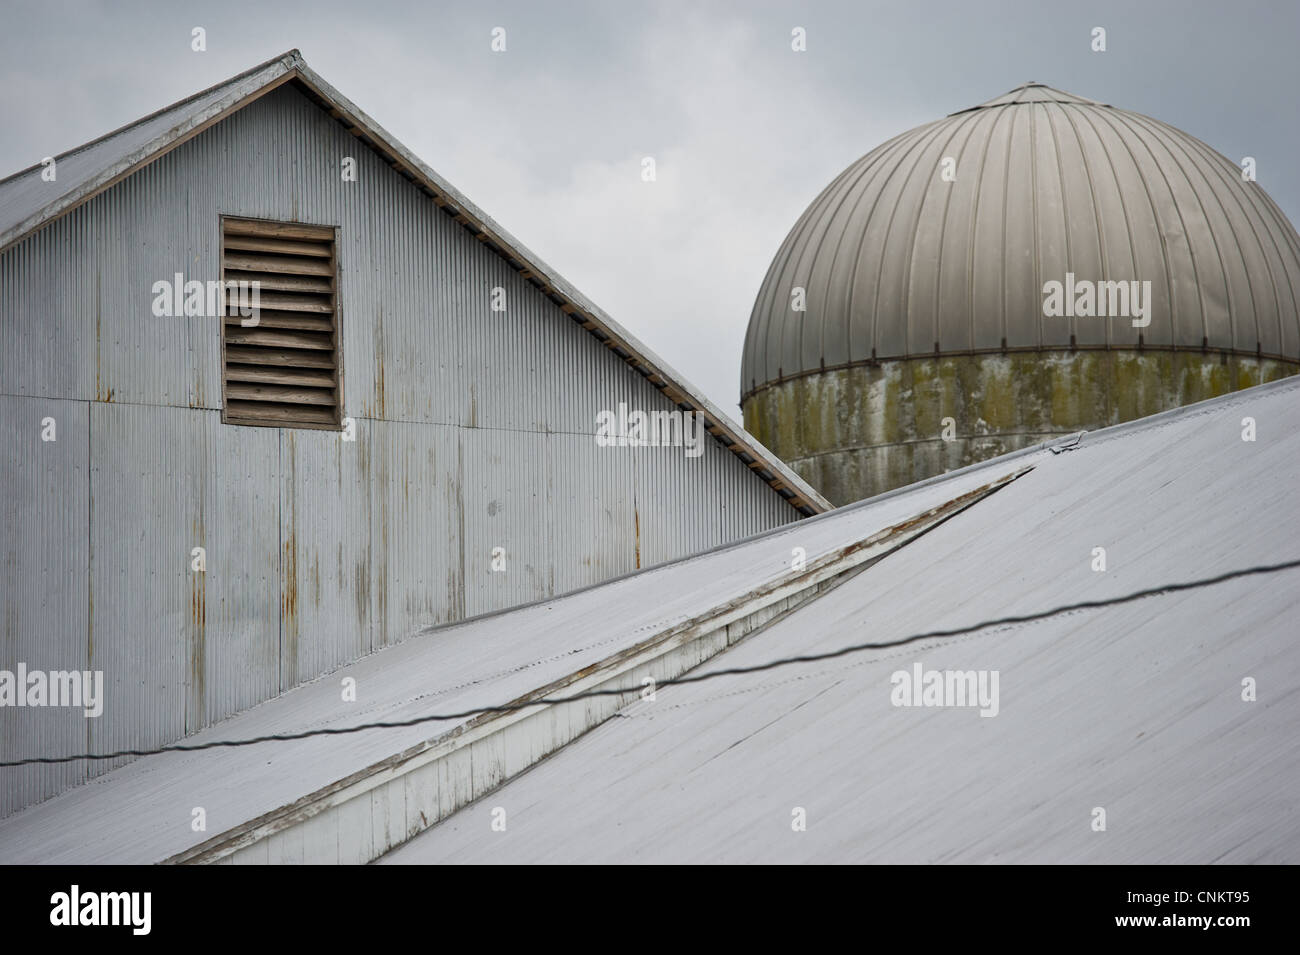 Peaks of rooftops of a barn and the top of a silo. Stock Photo